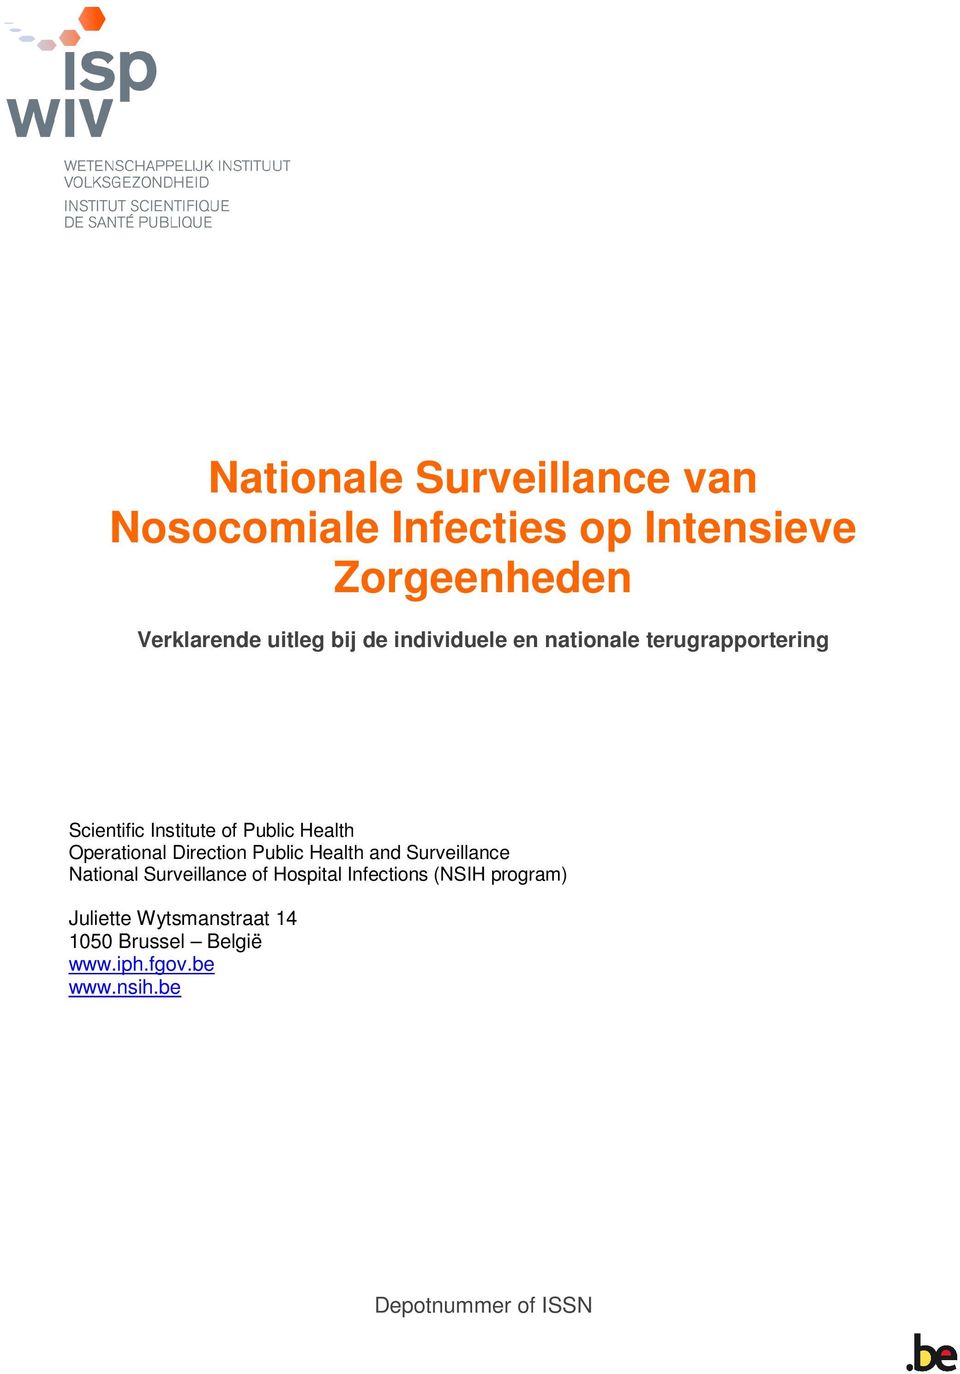 Operational Direction Public Health and Surveillance National Surveillance of Hospital Infections